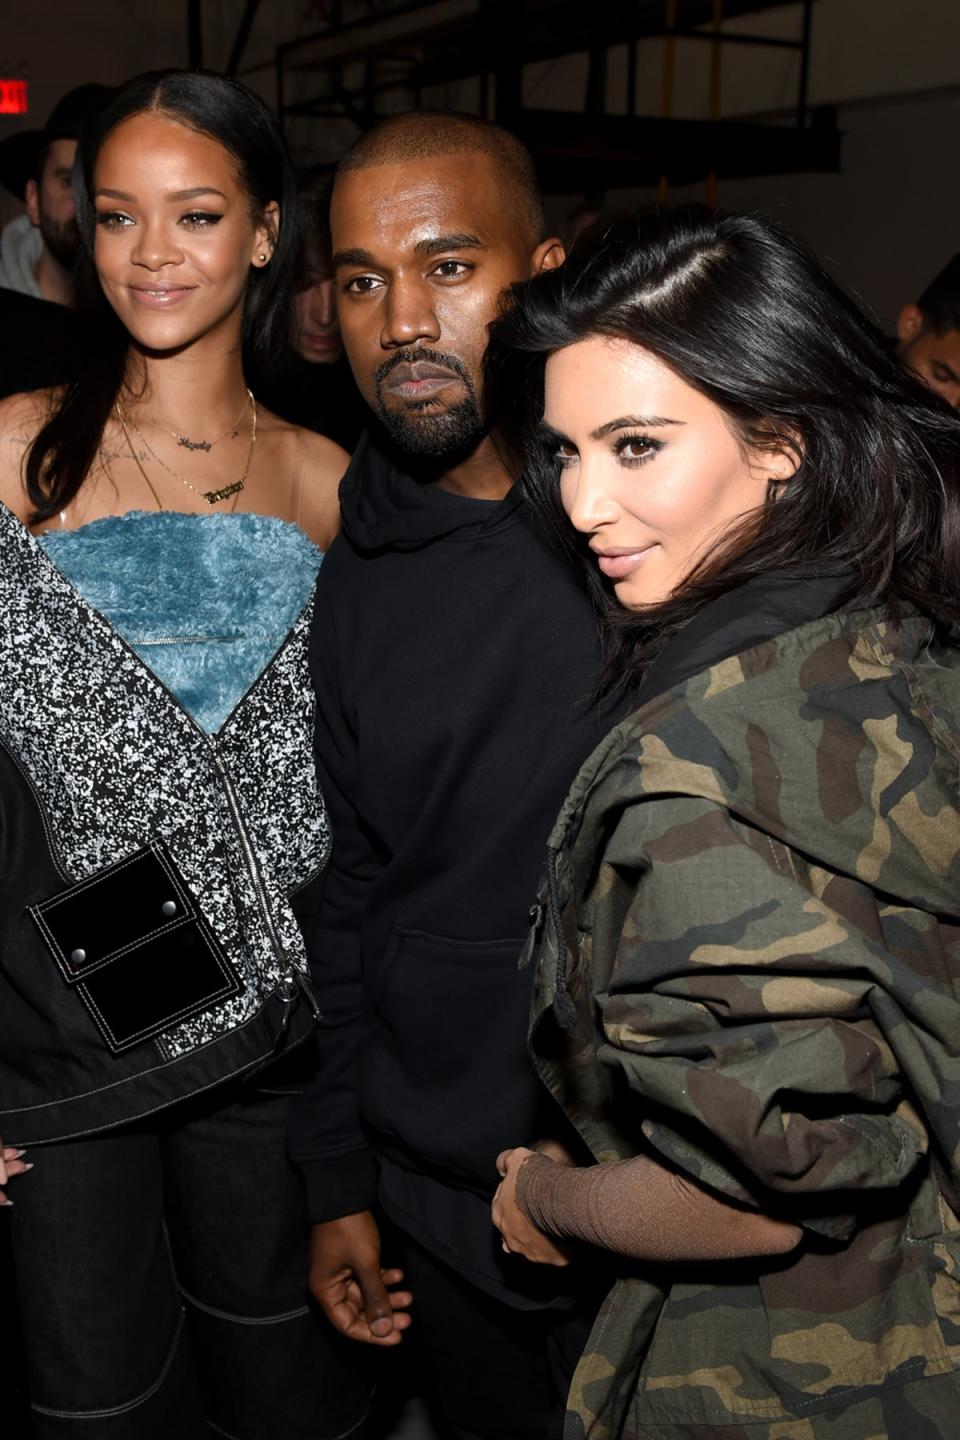 Going camo: Kim Kardashian strikes her best pose as she takes a picture with husband Kanye West and Rihanna (Picture: Dimitrios Kambouris/Getty Images for adidas) (Dimitrios Kambouris/Getty Images )